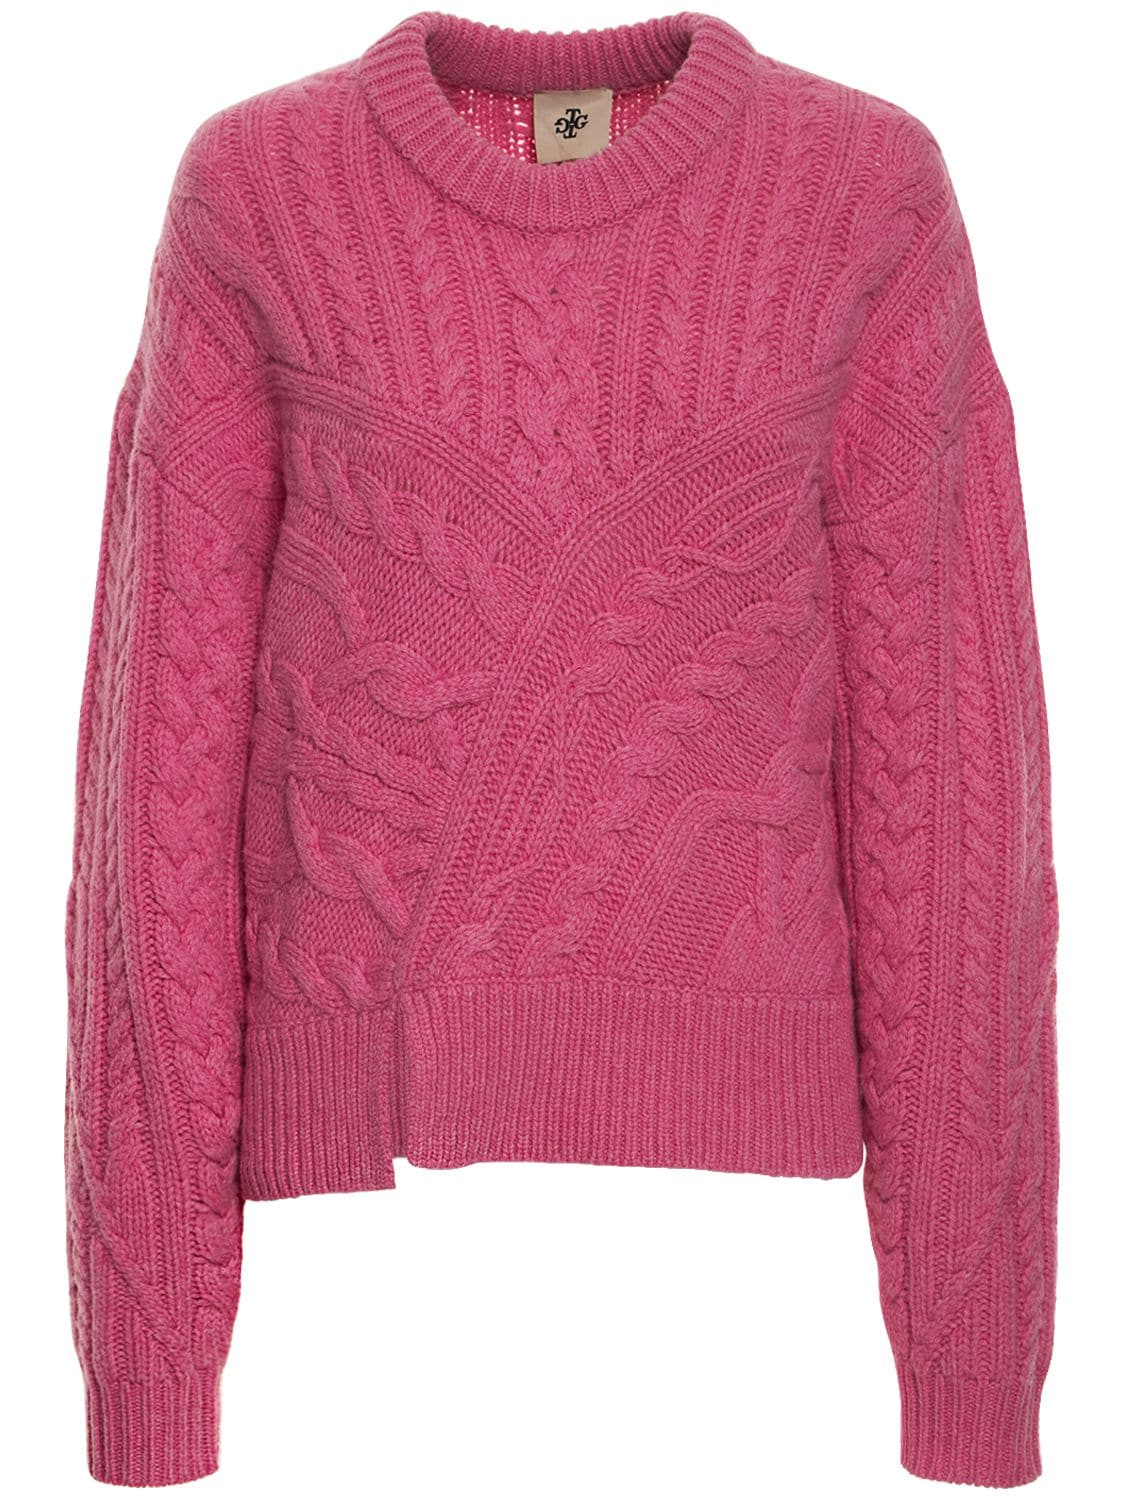 THE GARMENT CANADA WOOL KNIT SWEATER